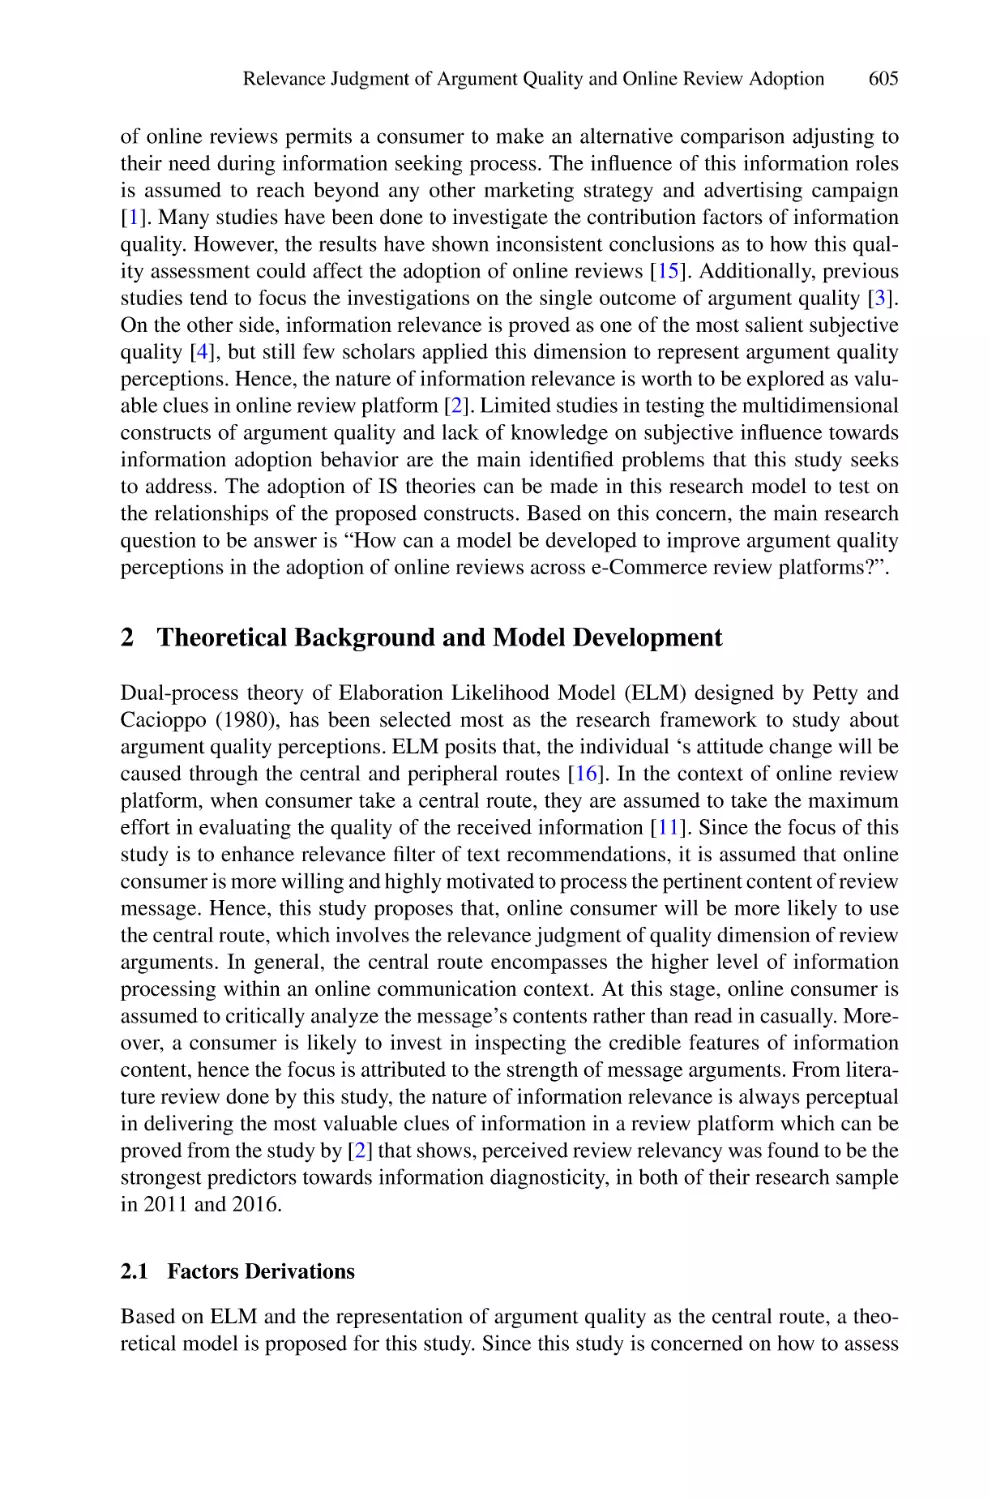 2 Theoretical Background and Model Development
2.1 Factors Derivations